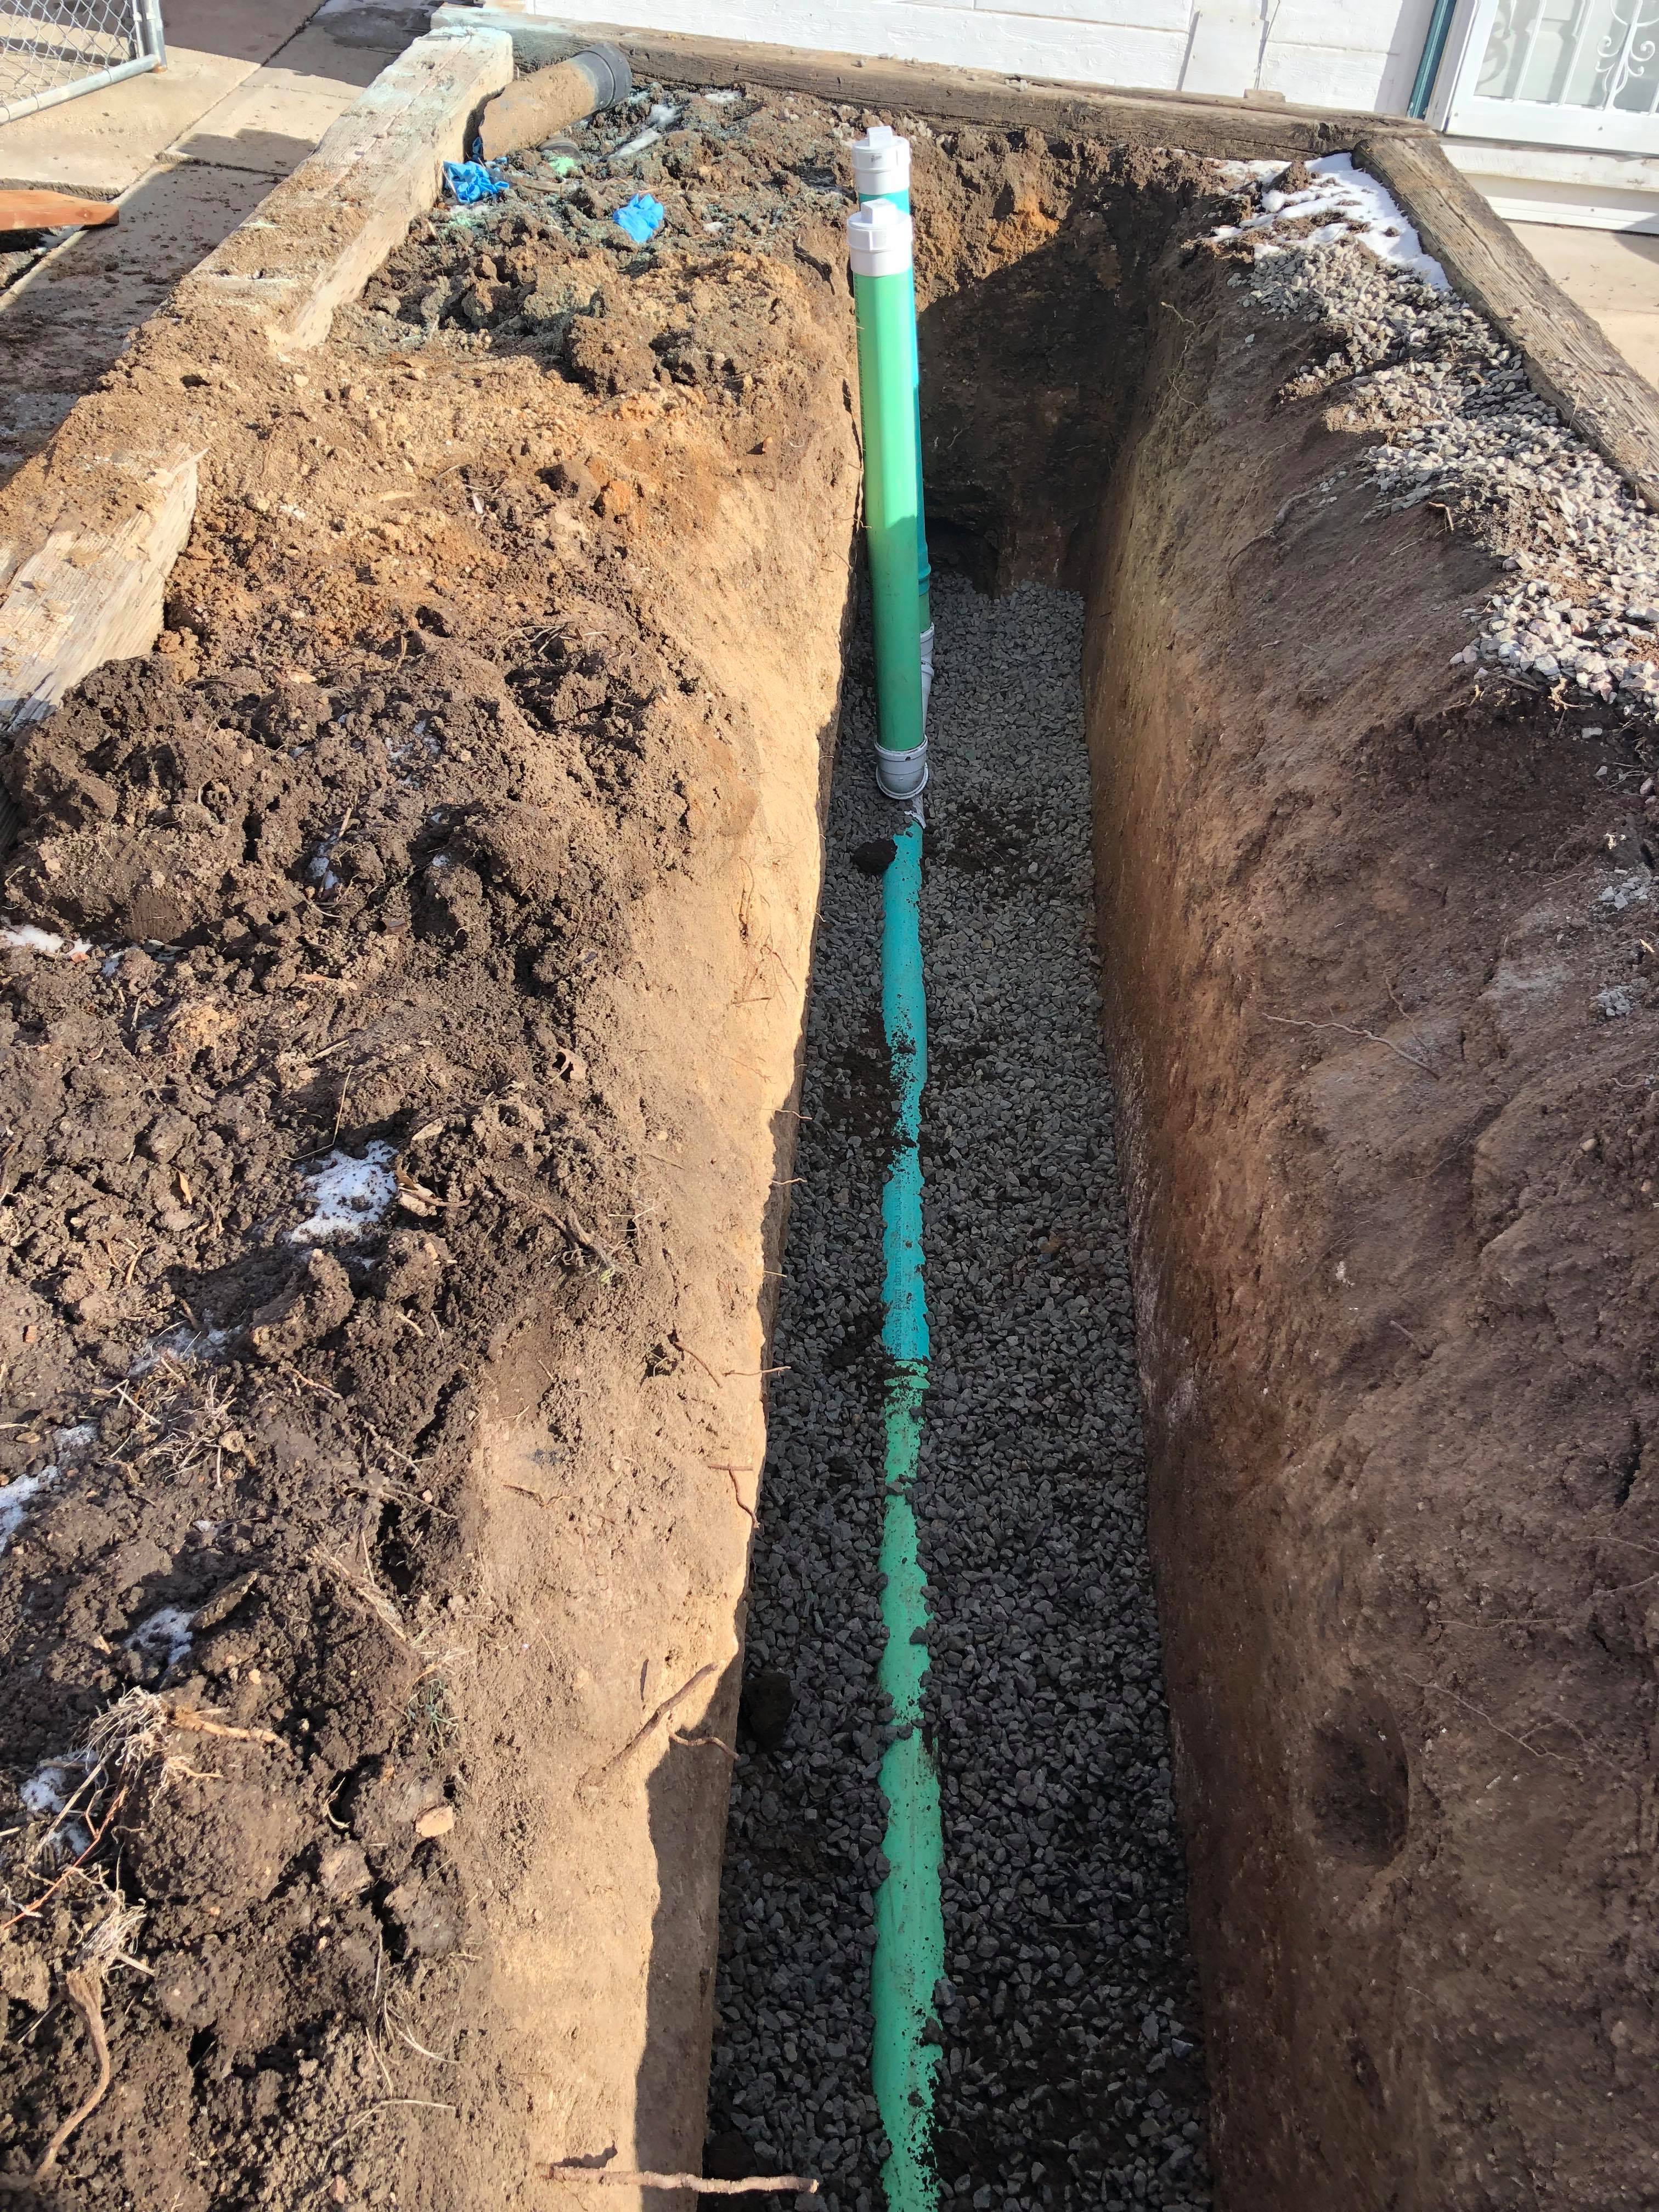 A new sewer line replacement in Arvada, CO.